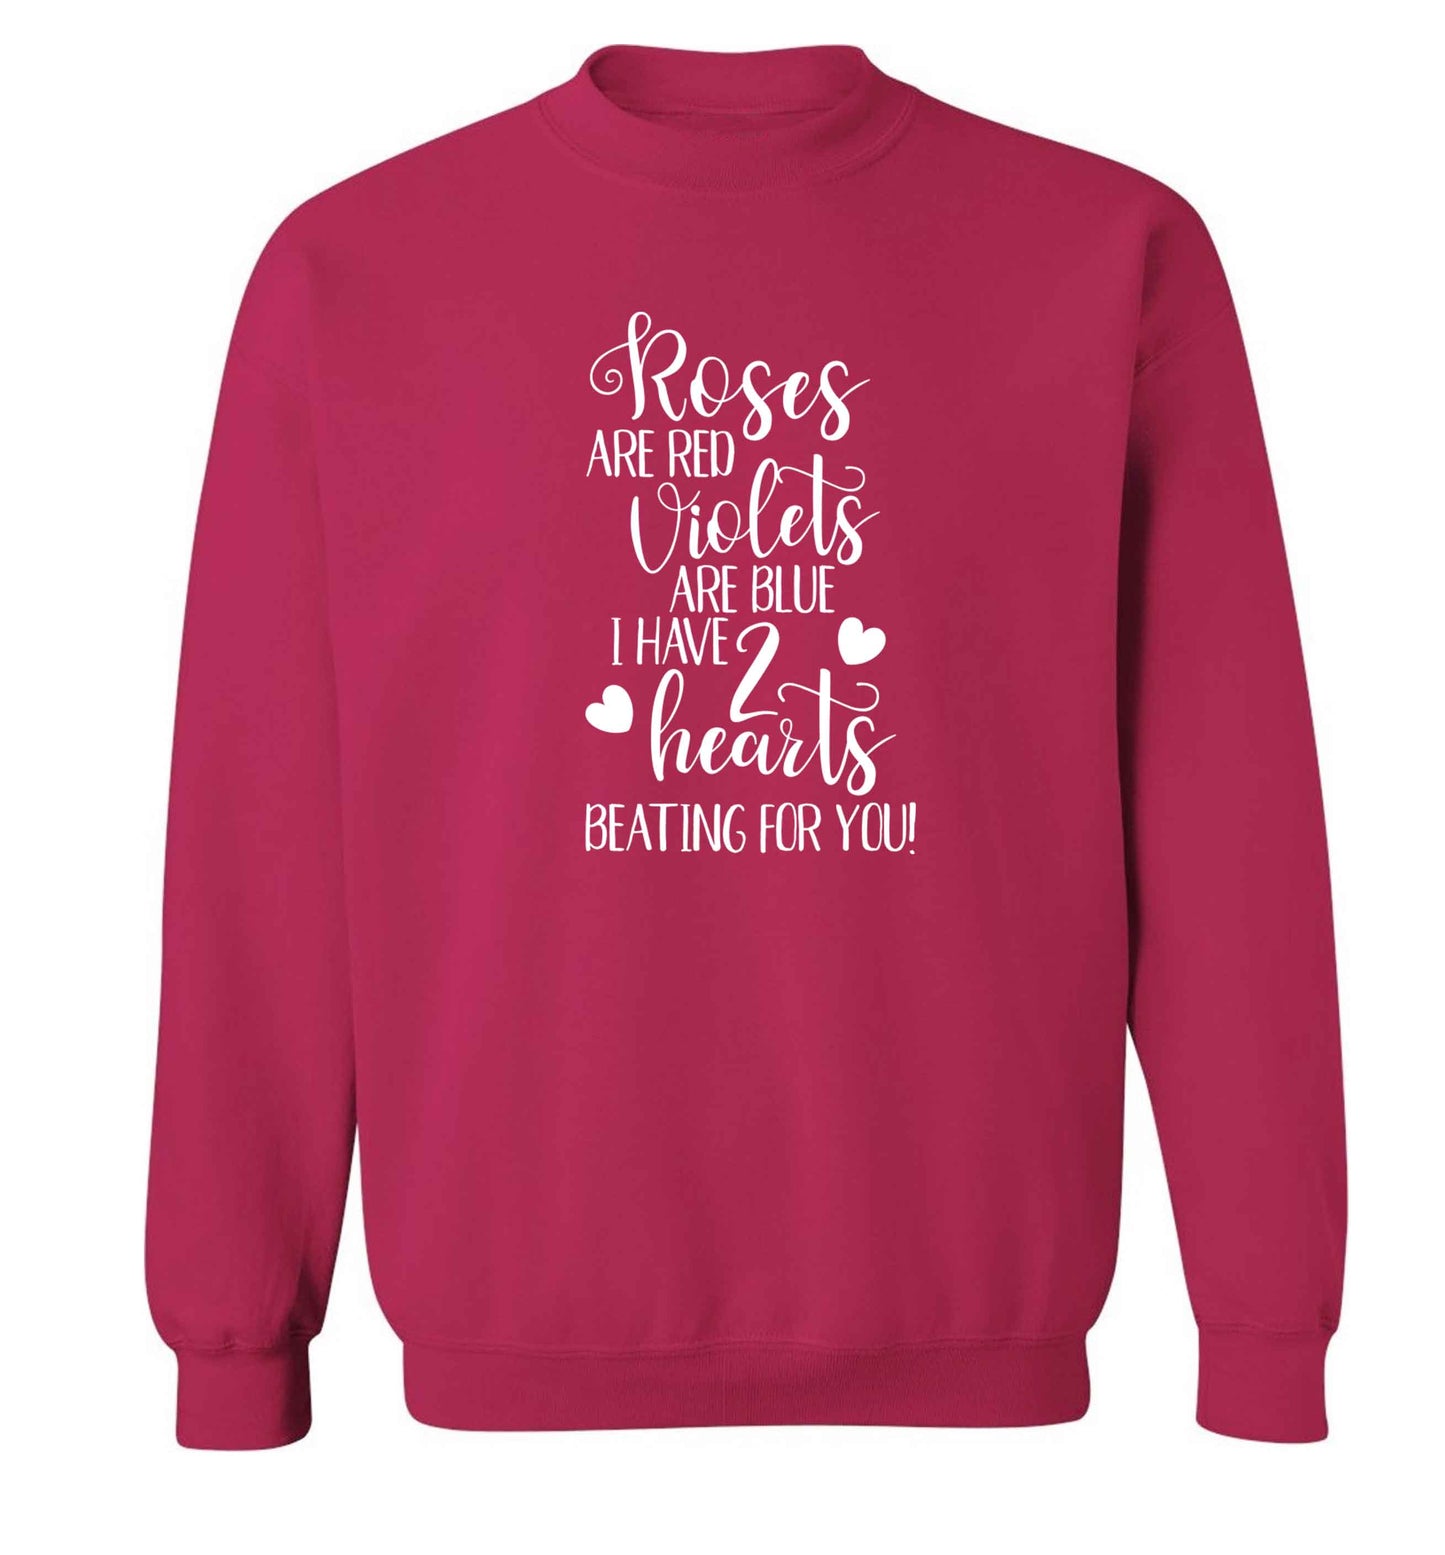 Roses are red violets are blue I have two hearts beating for you Adult's unisex pink Sweater 2XL